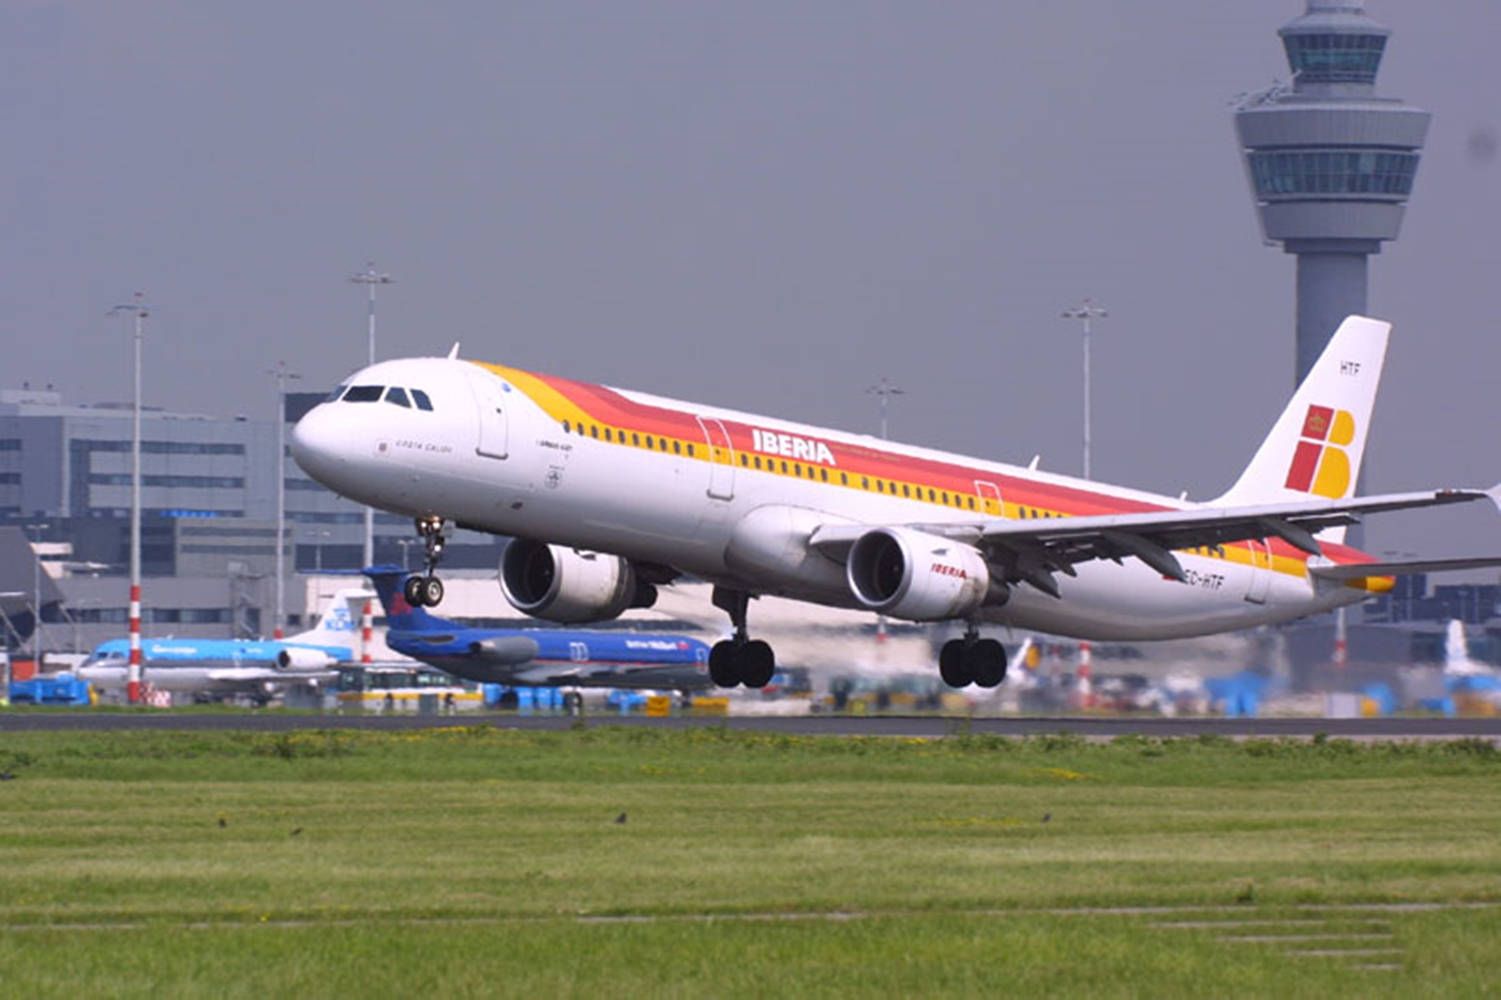 Iberia Airlines Airplane Takeoff On Busy Airport Wallpaper